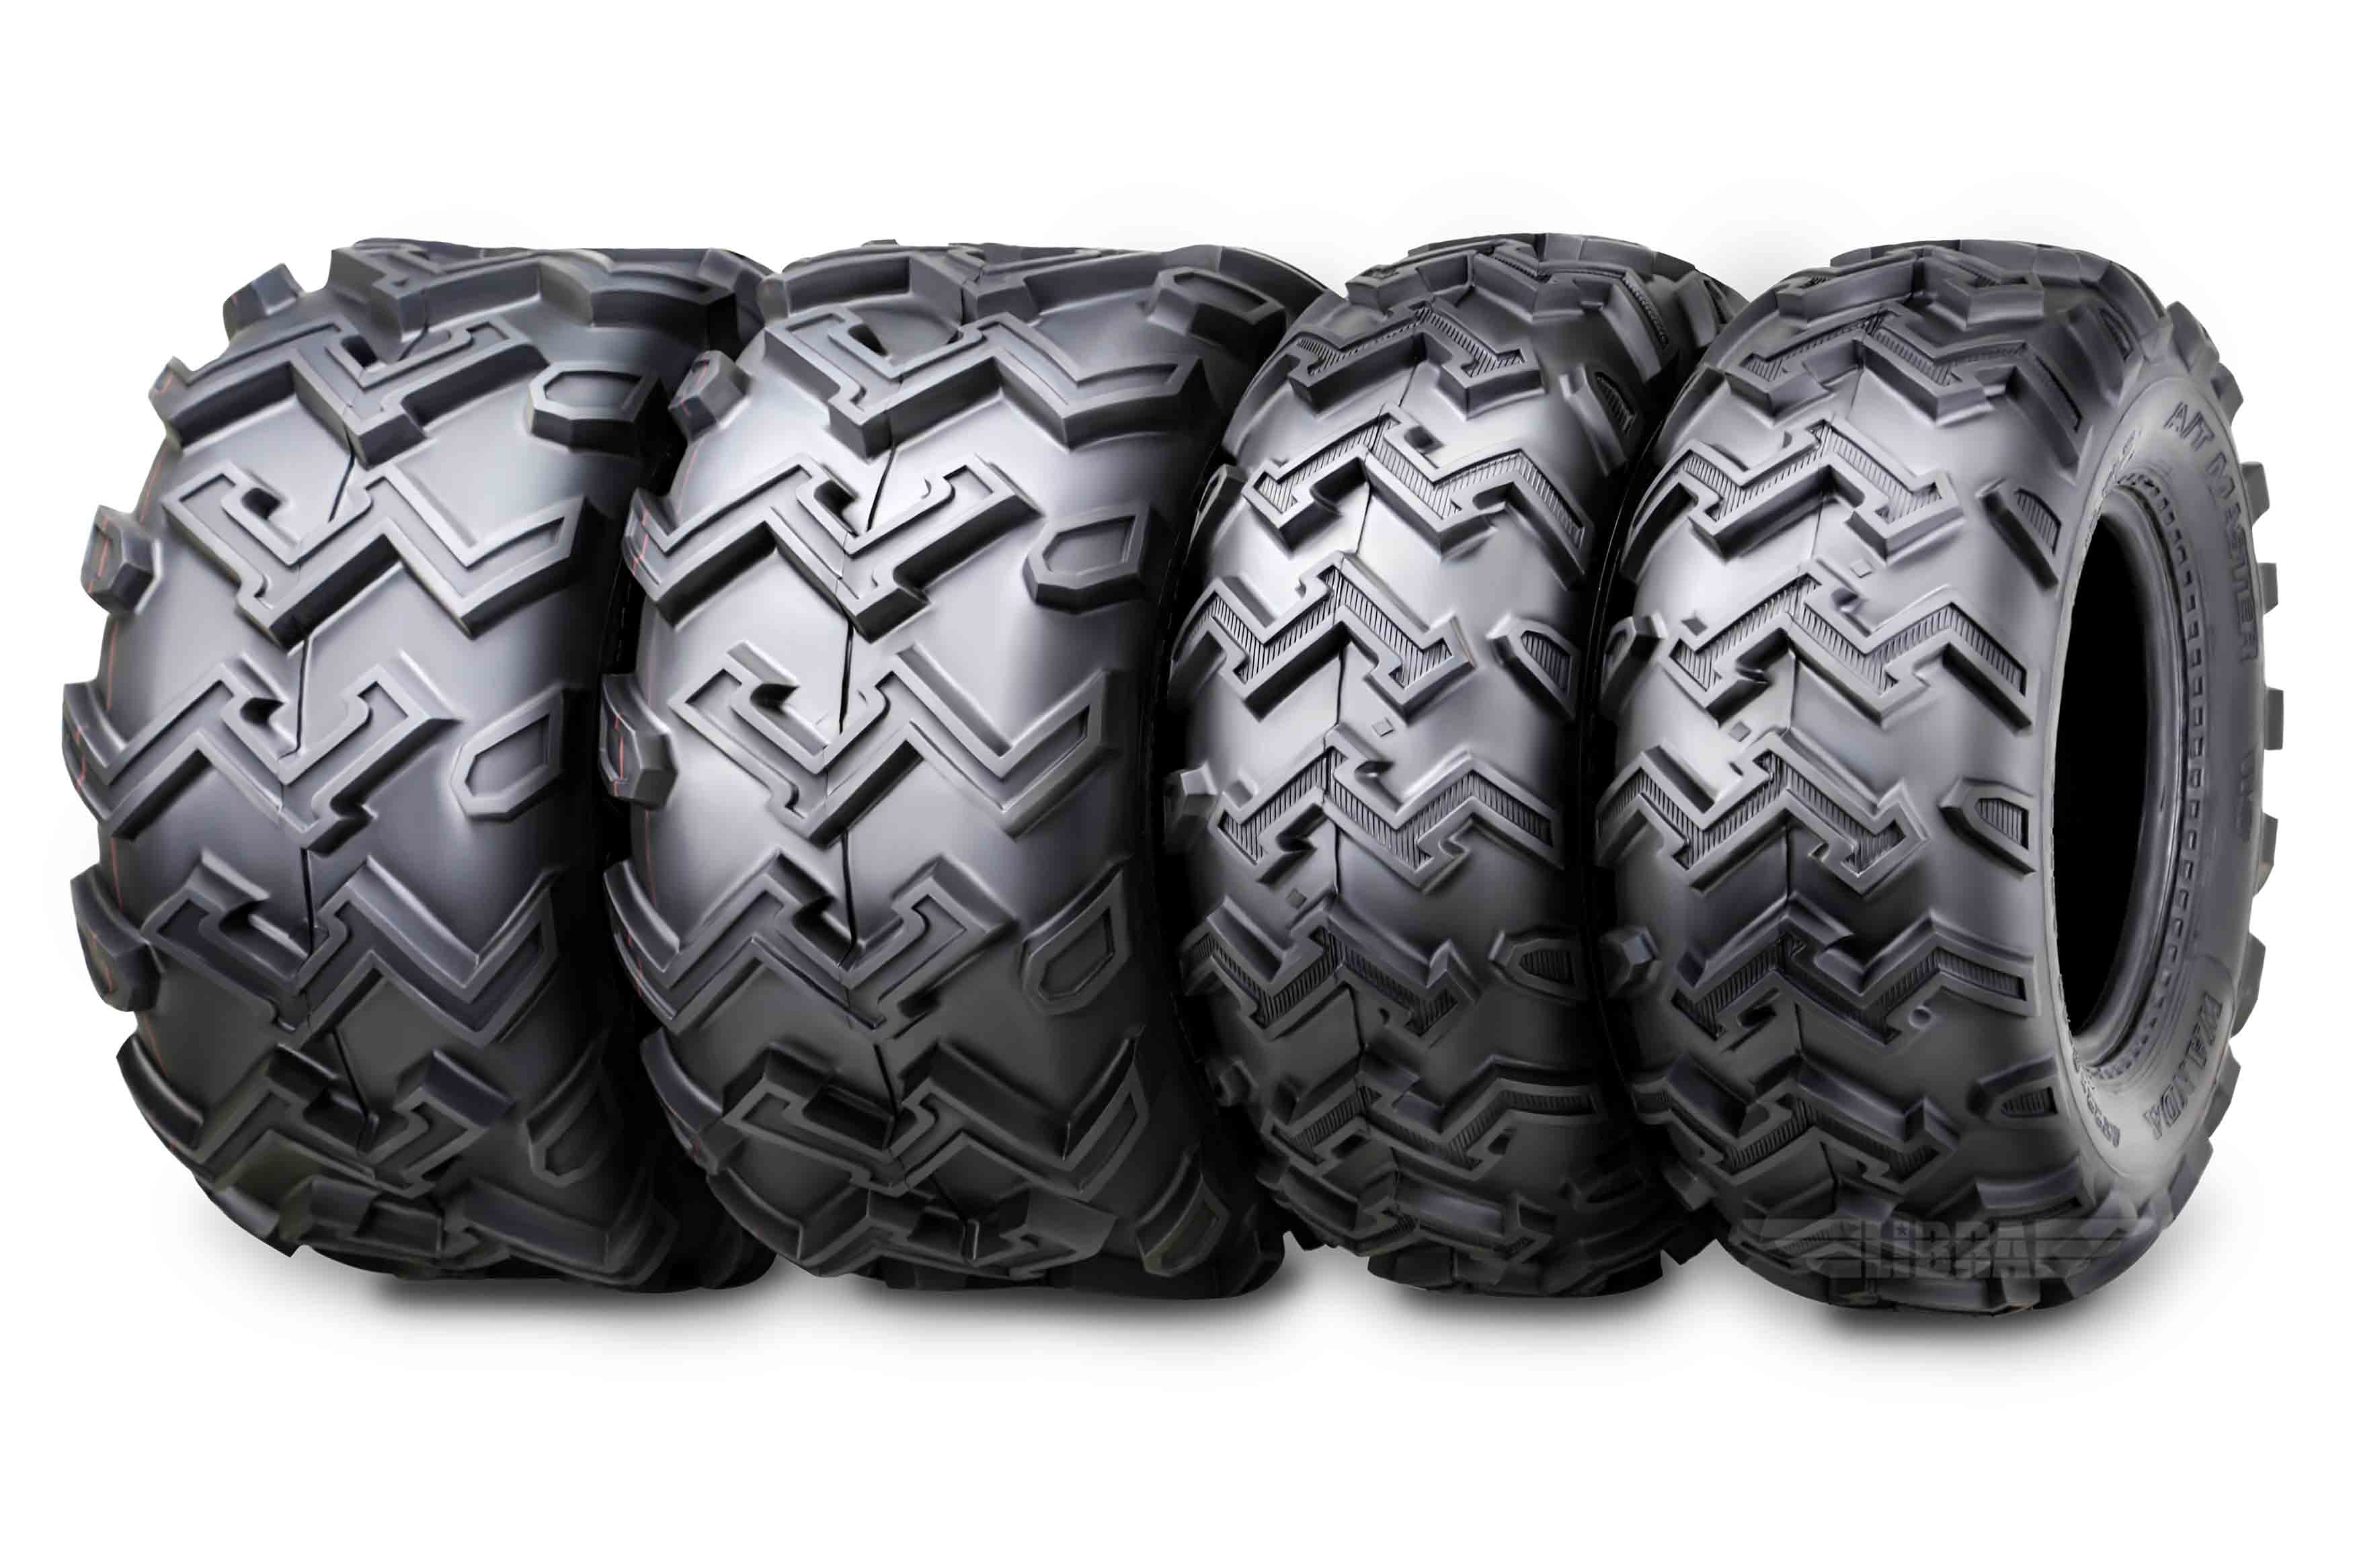 Need Bigger Tires for Your ATV. Consider These 25x11 12 Options